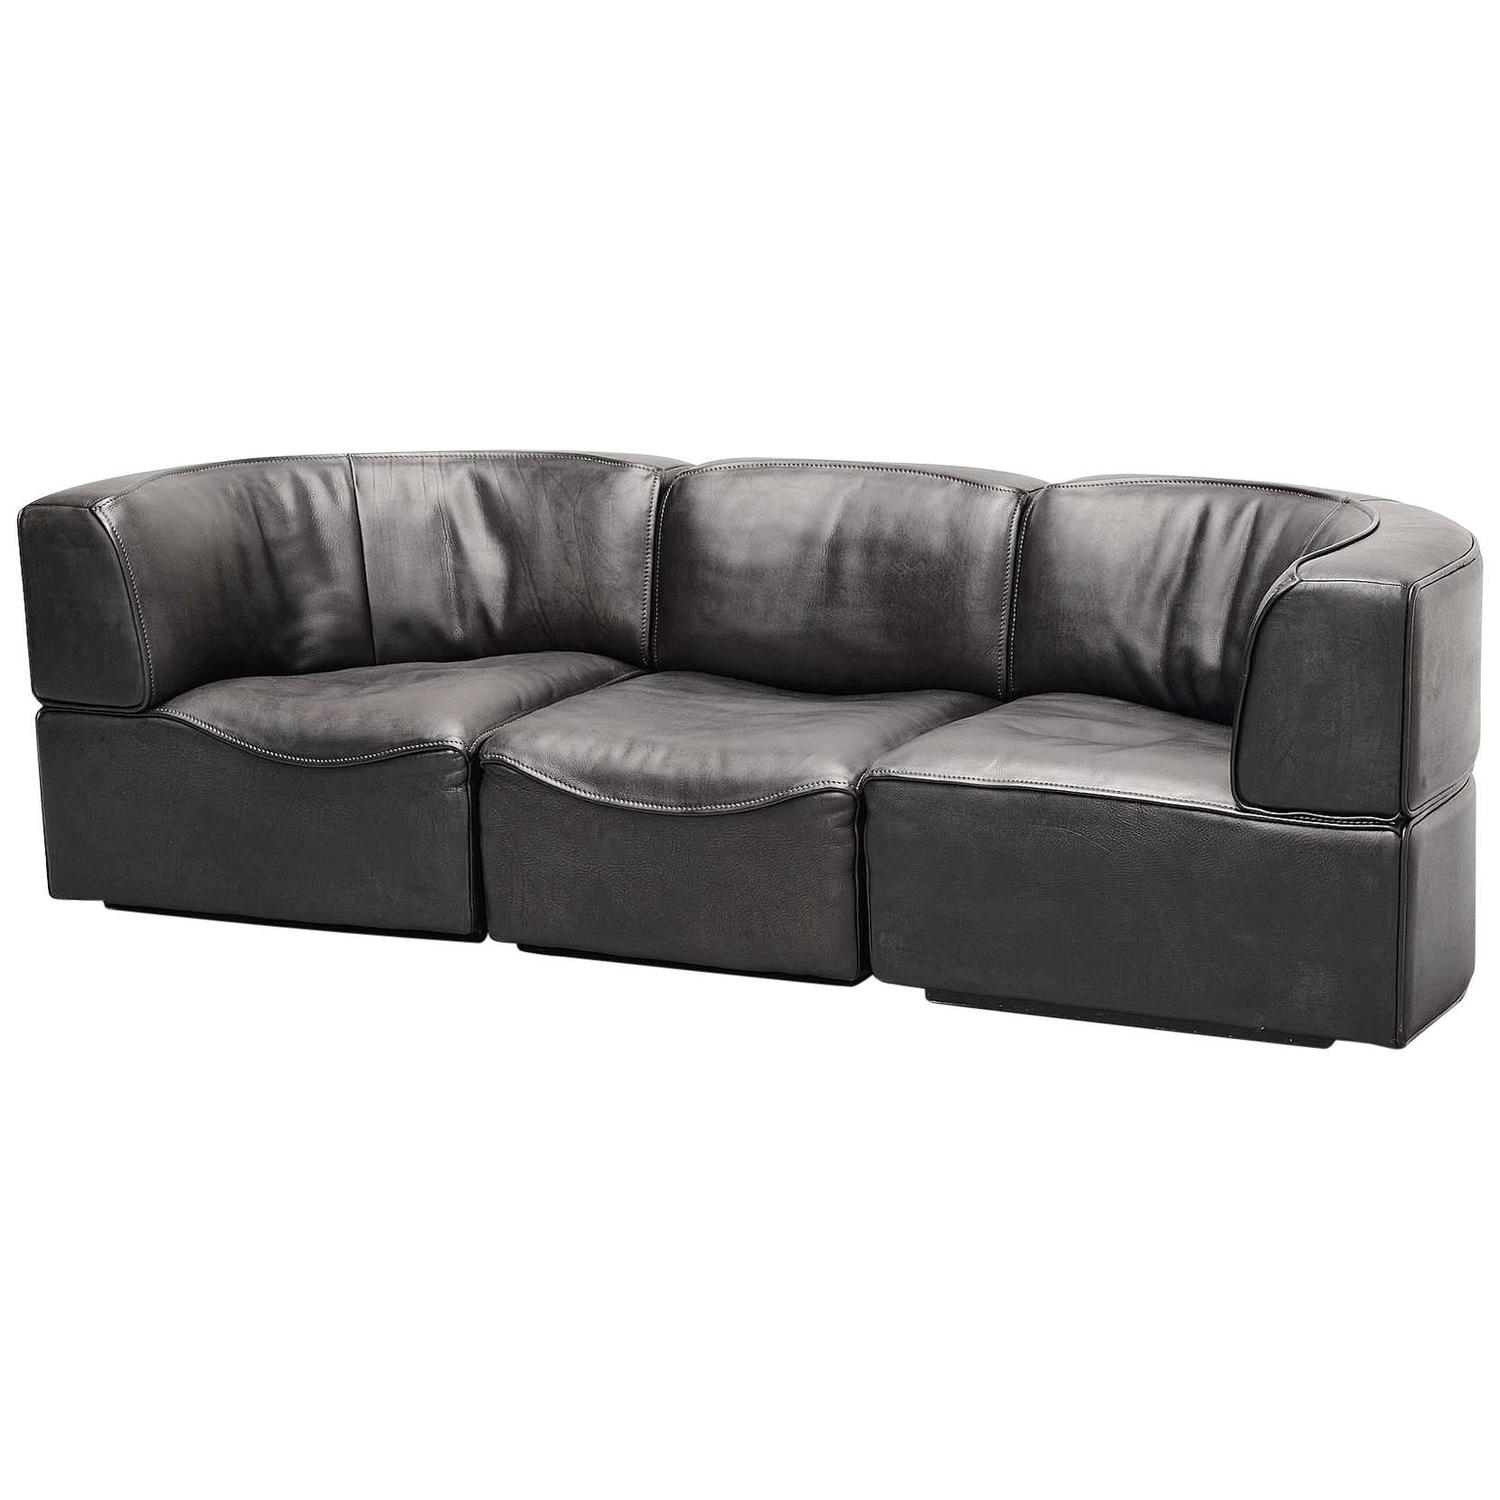 De Sede DS 76 Modular Sofa in Dark Brown Leather For Sale at 1stdibs